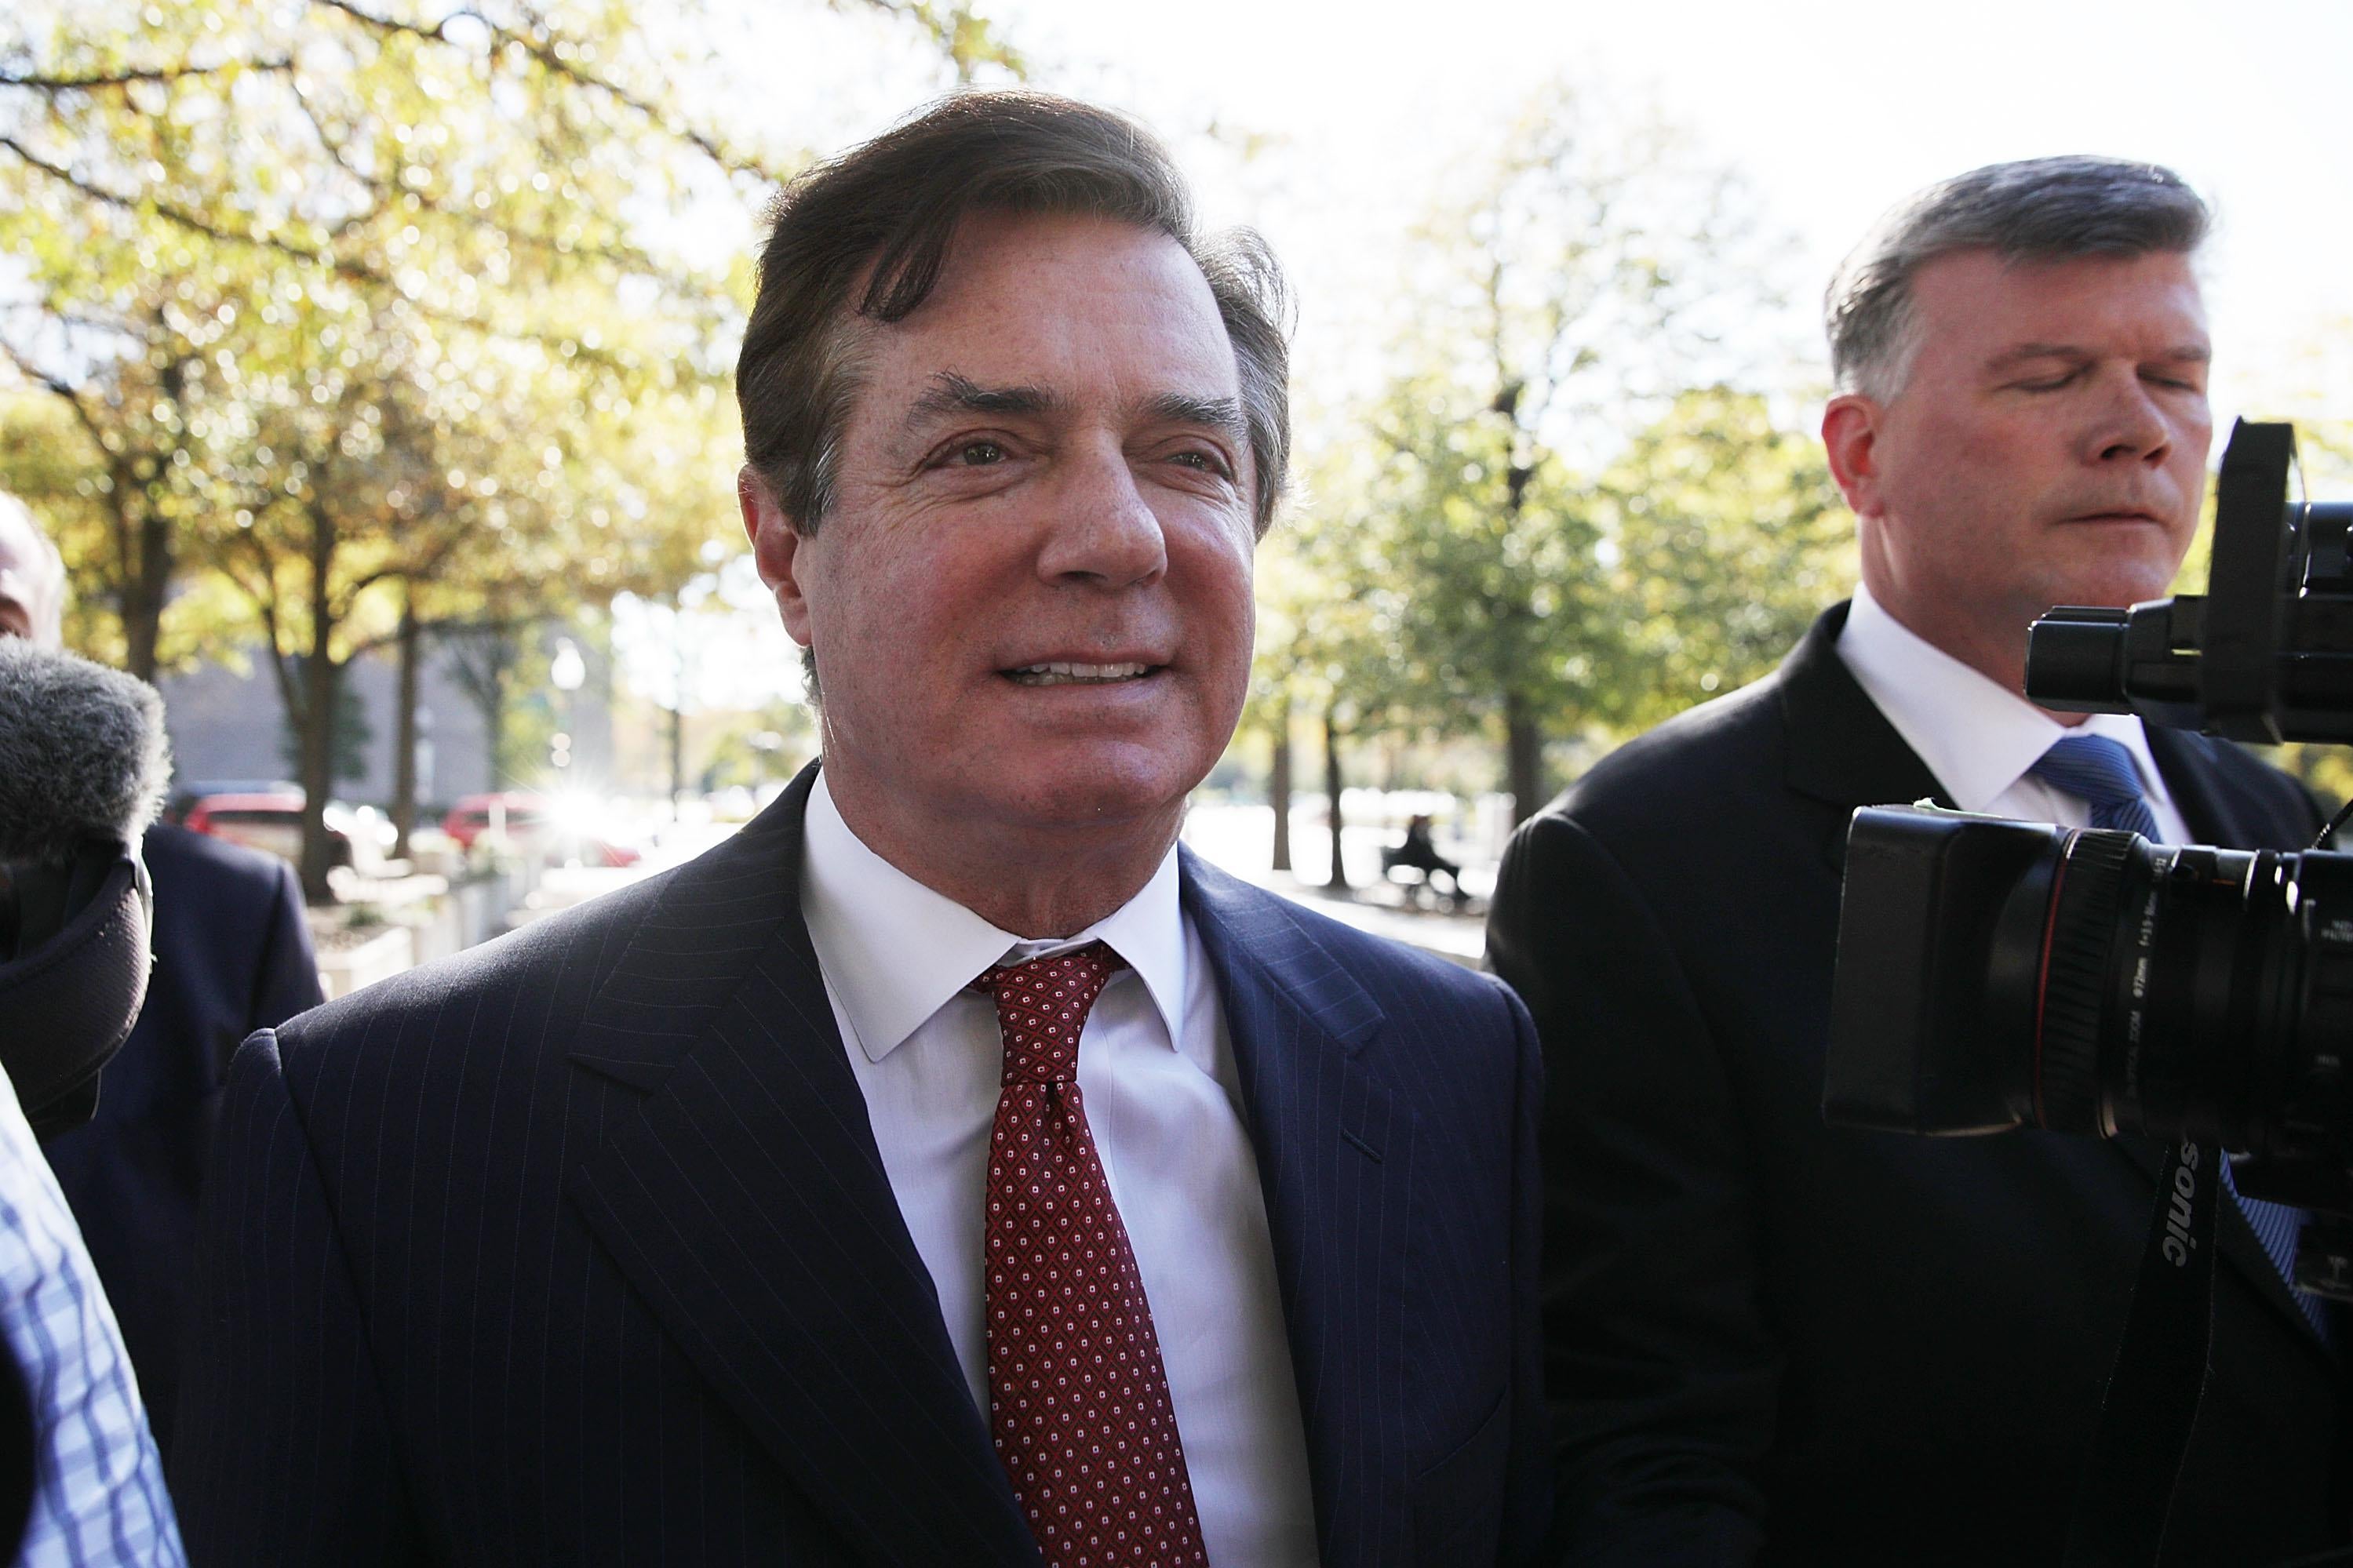 WASHINGTON, DC - NOVEMBER 02:  Former Trump campaign chairman Paul Manafort (L) arrives at a federal courthouse with his attorney Kevin Downing (R) November 2, 2017 in Washington, DC. Manafort and his associate Rick Gates were expected to appear in court again this afternoon for a hearing.  (Photo by Alex Wong/Getty Images)